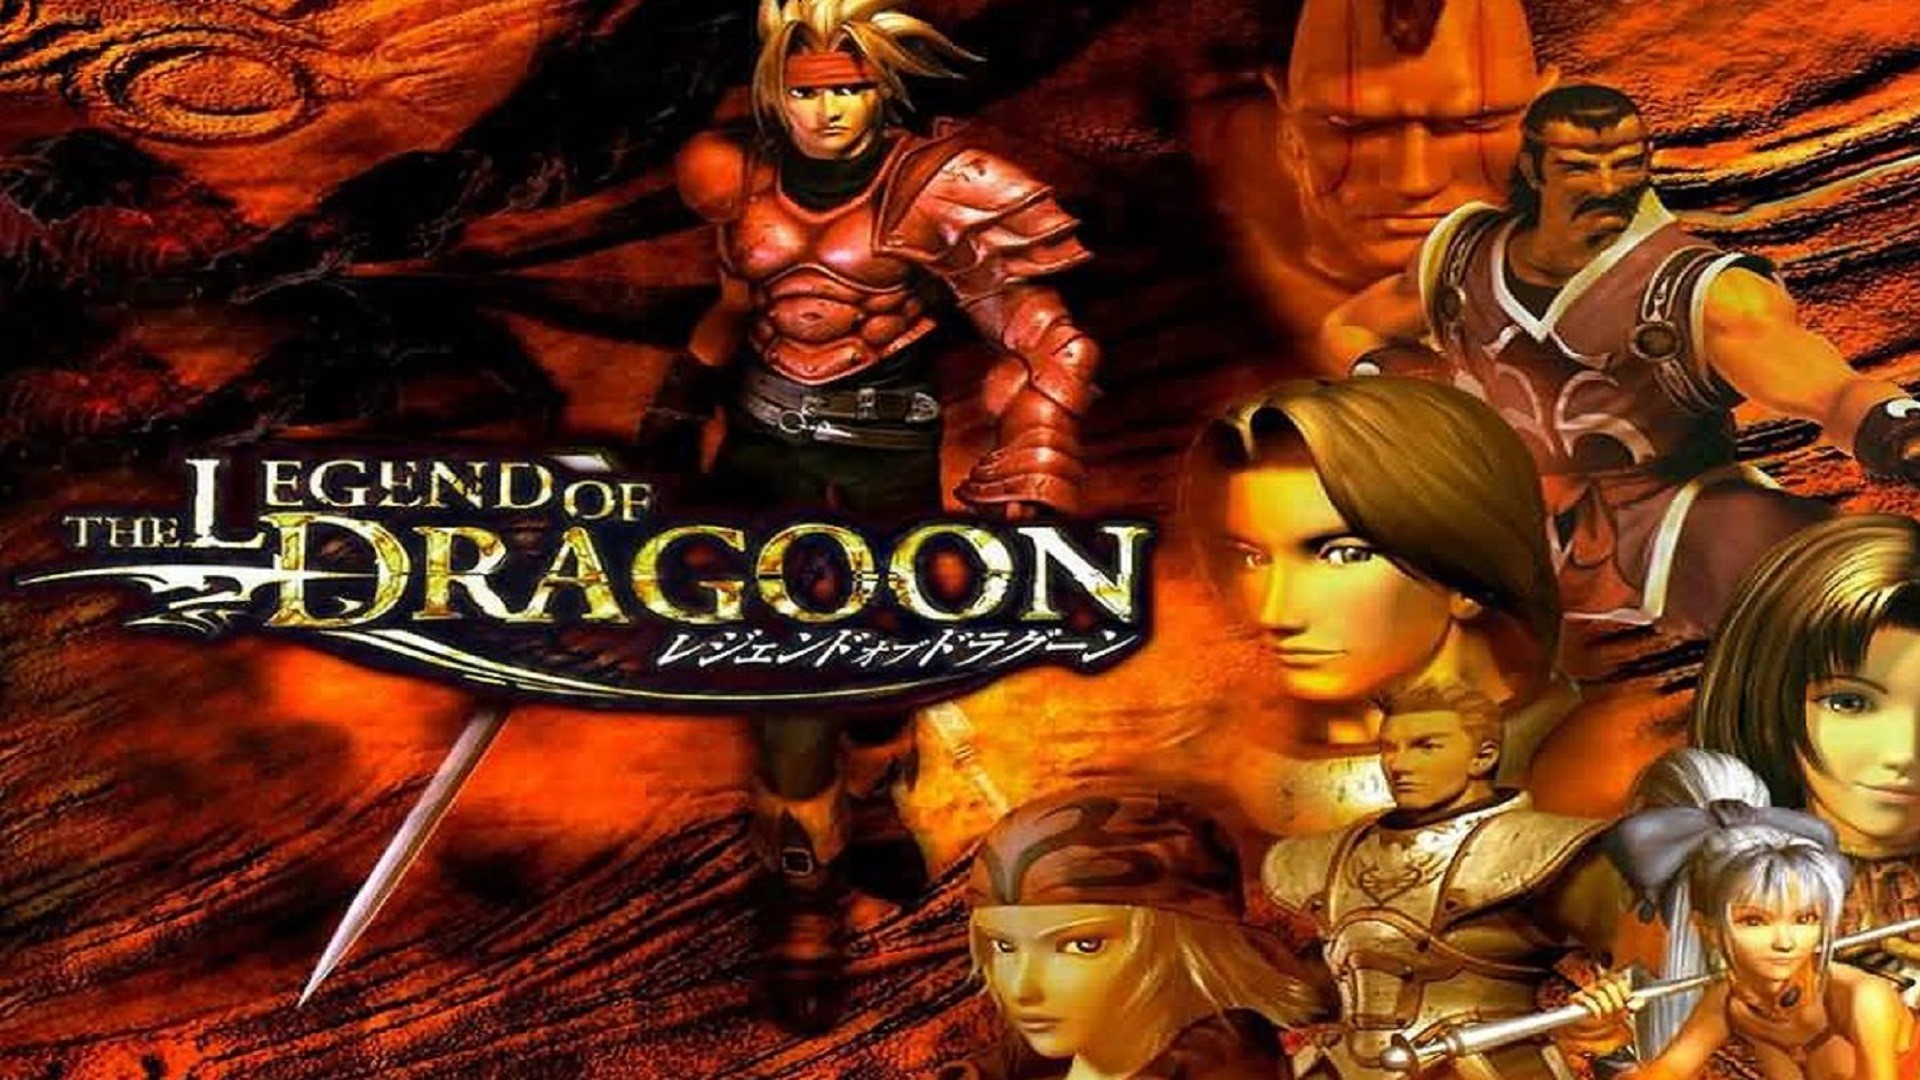 the-legend-of-dragoon-needs-to-make-a-comeback